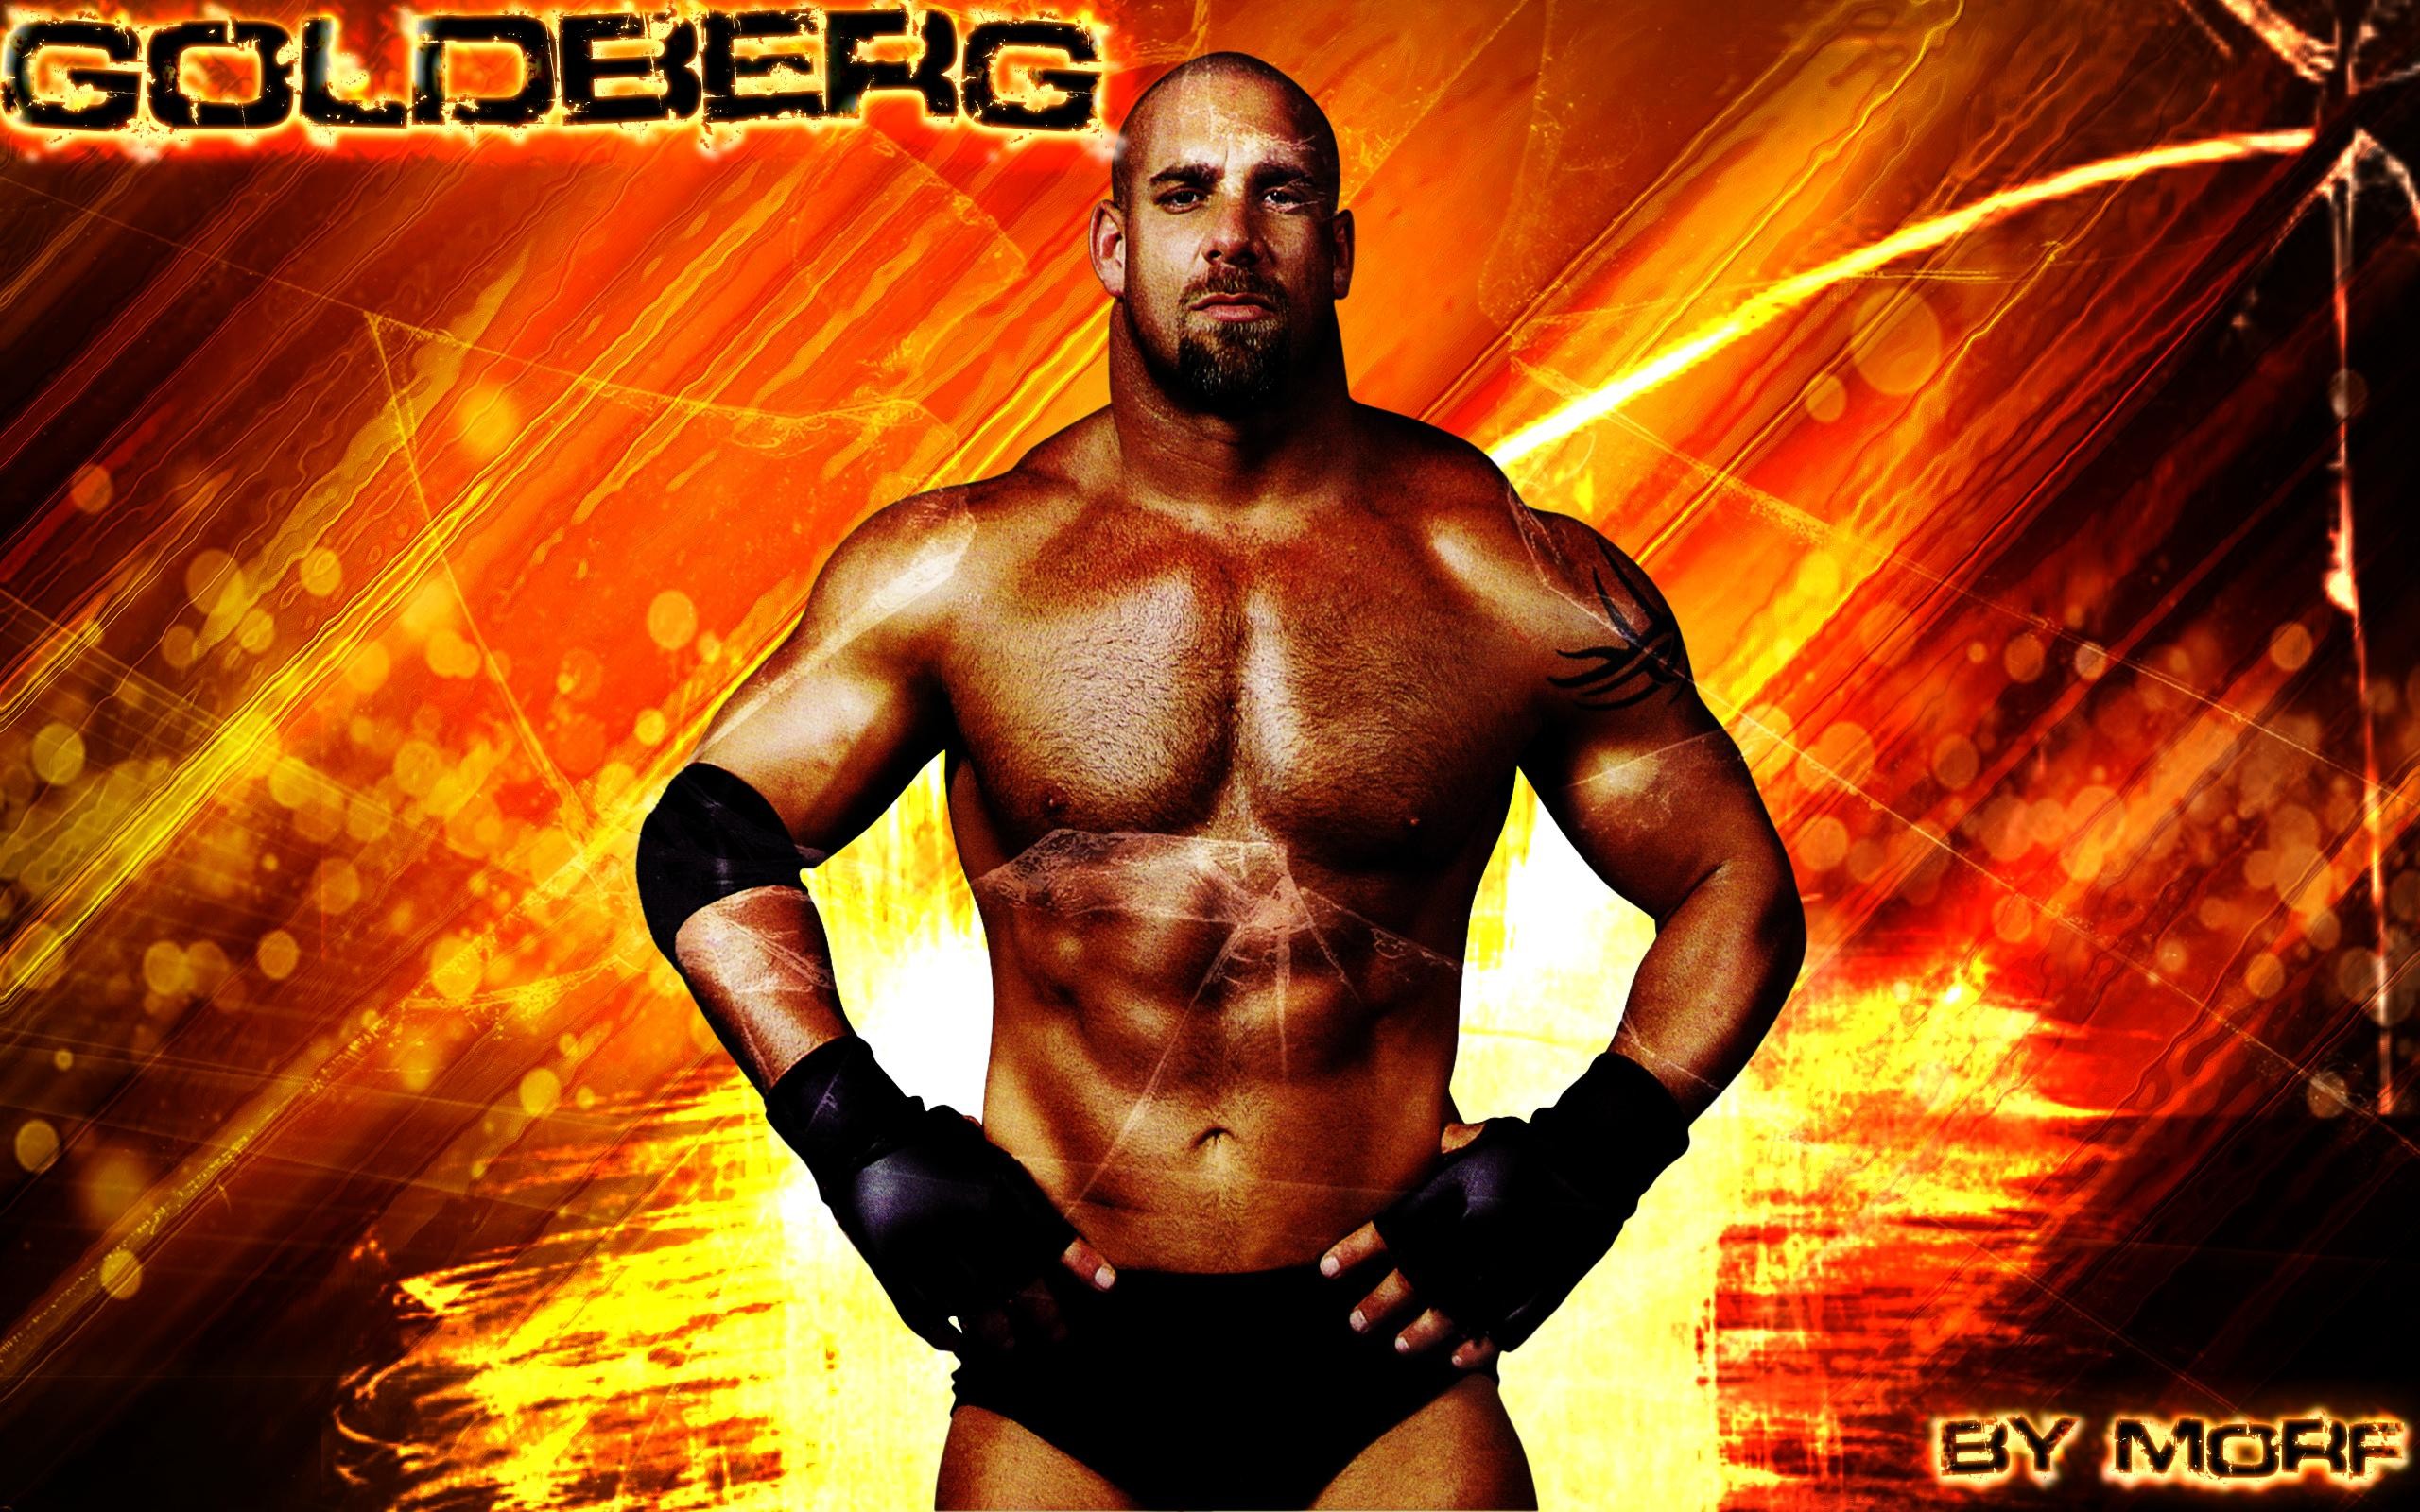 2560x1600 WWE images goldberg wallpaper HD wallpaper and background photos